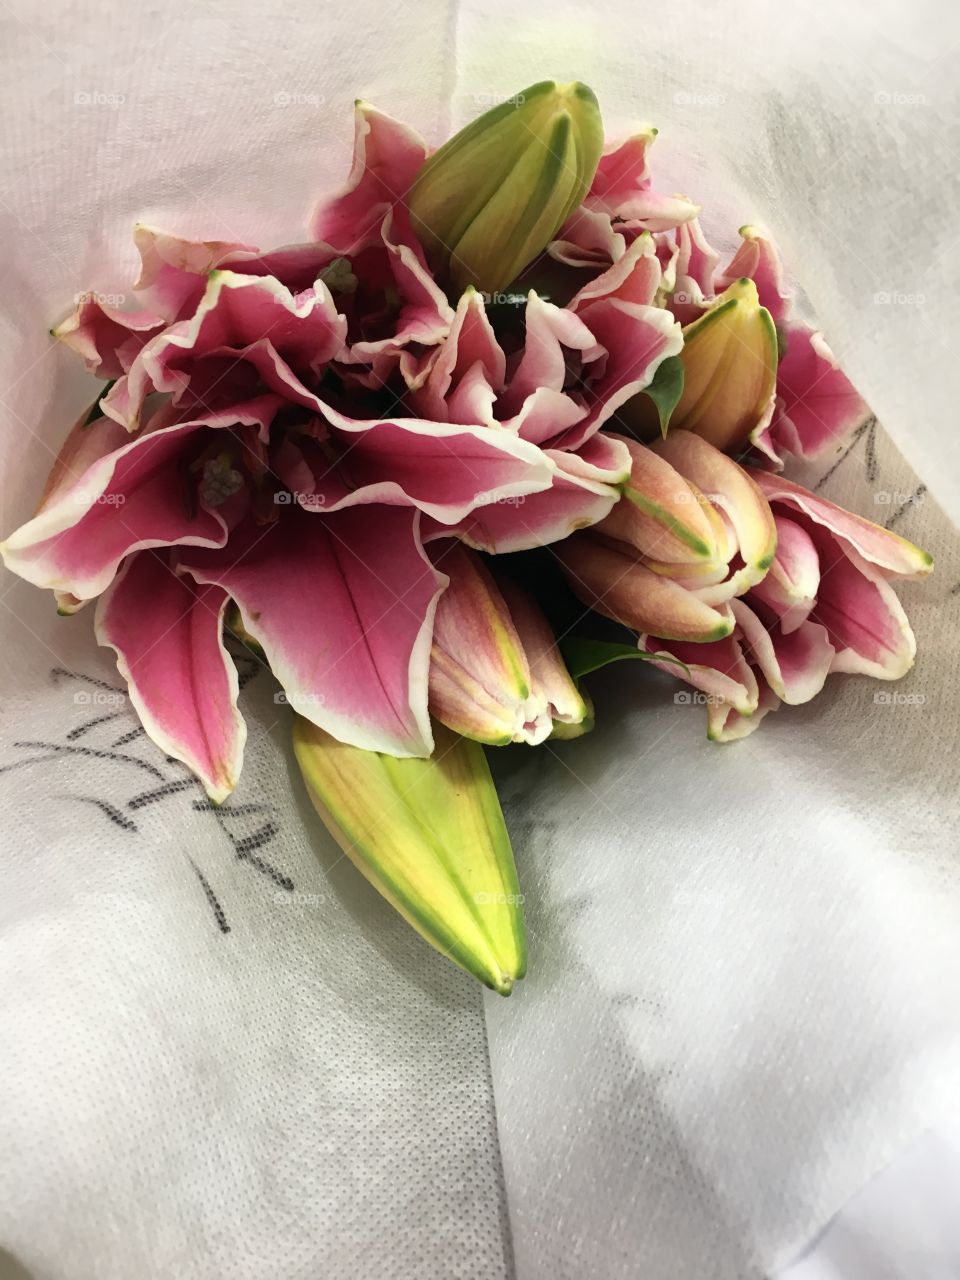 Flowers to brighten your day. Tigerlilies in pink. 